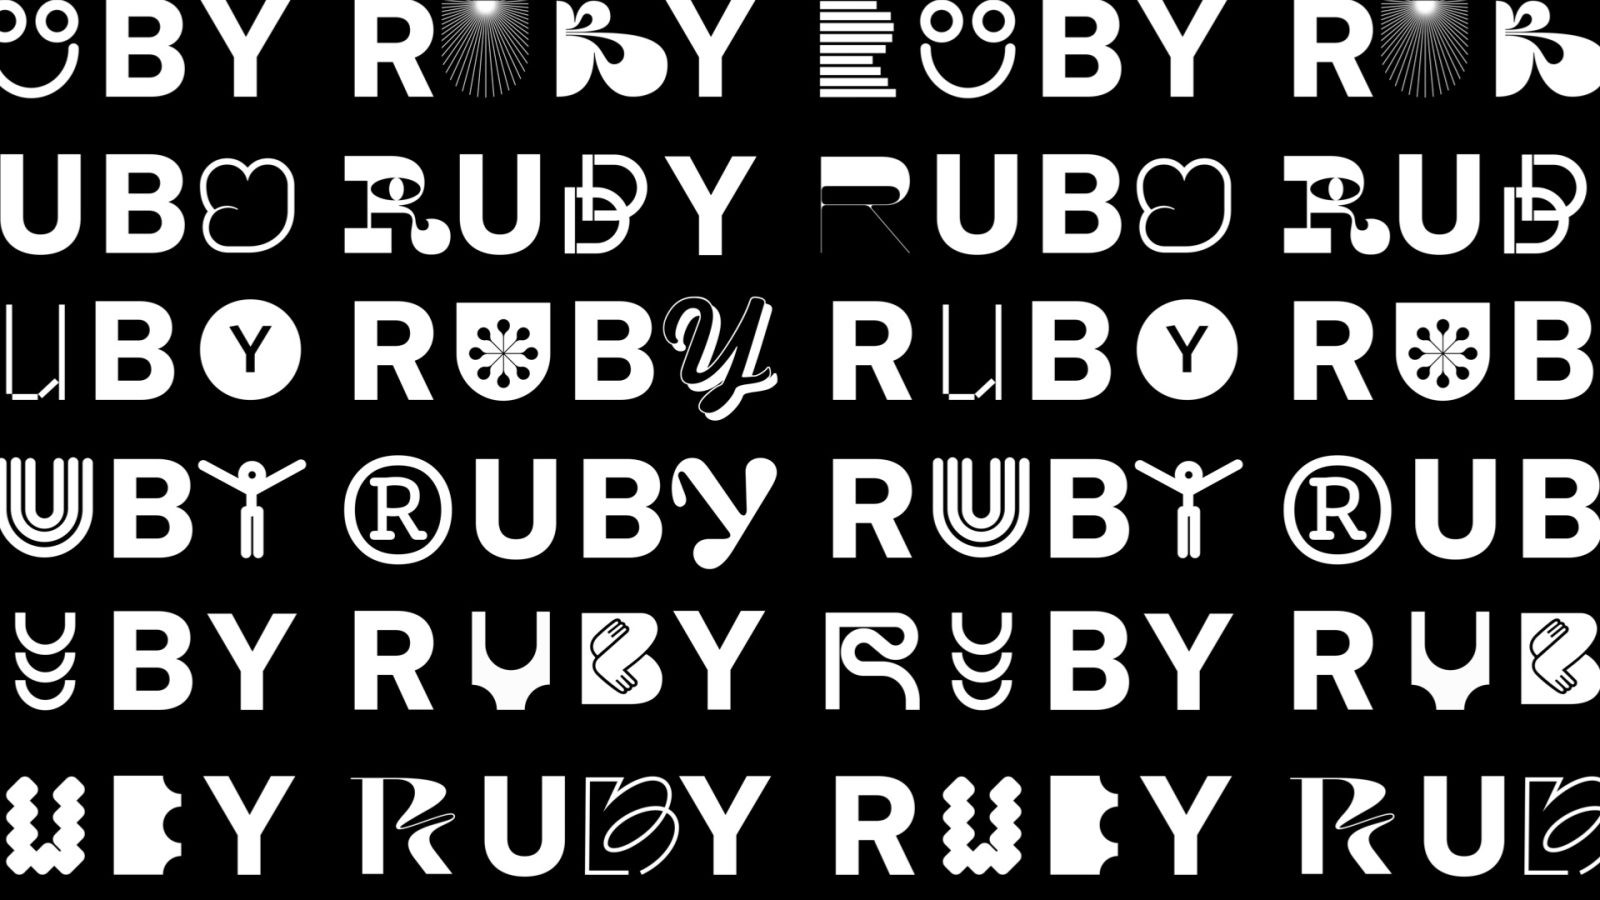 Ruby Hotels Brand Redesign Student Concept